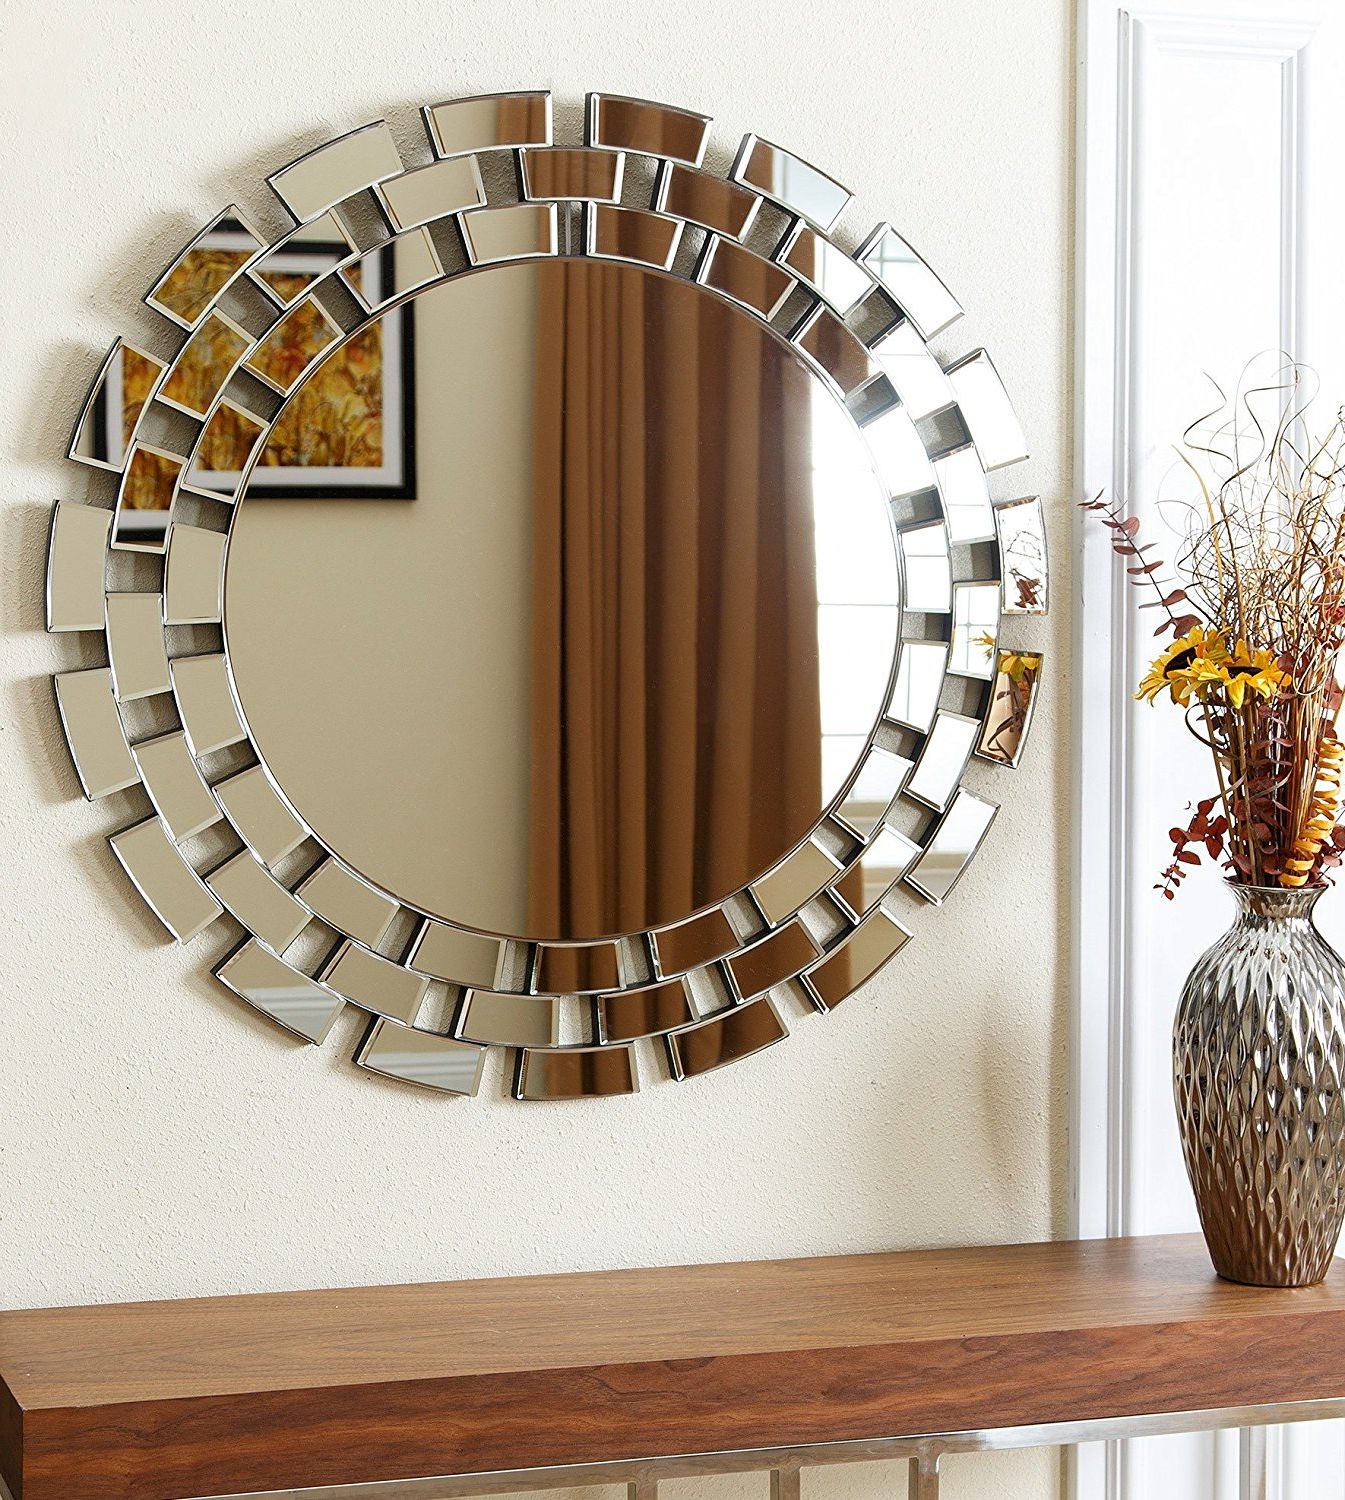 Fancy Wall Mirrors: Reflections Of Style And Elegance